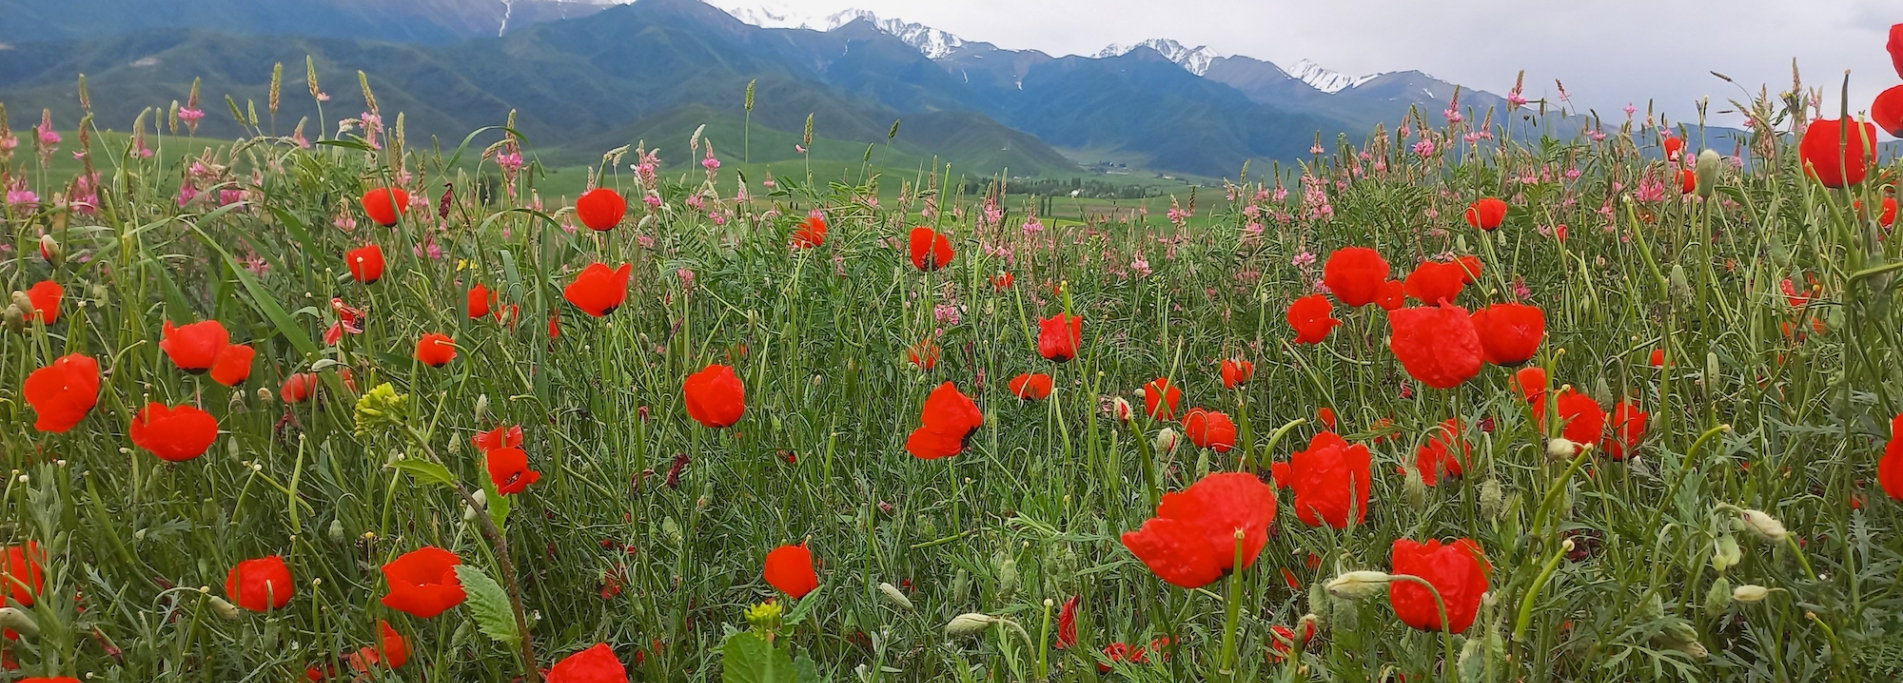 Blooming Kyrgyzstan  - Scarlet poppy fields of the Chui Valley